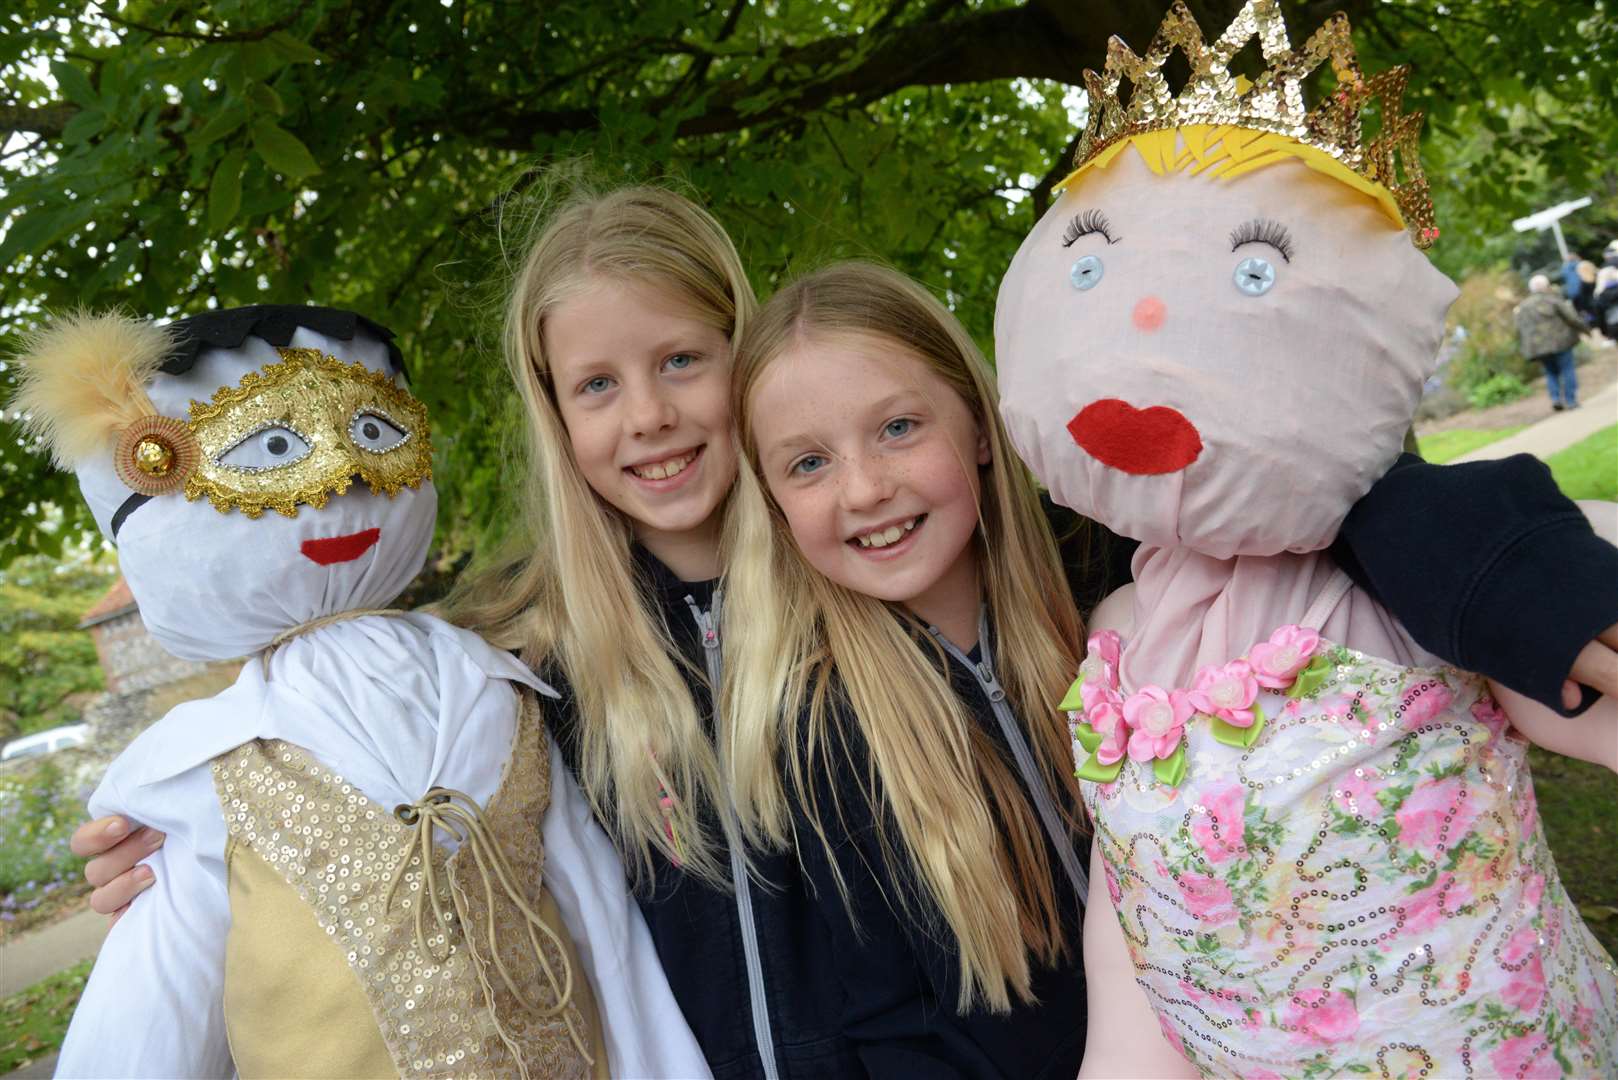 Emily Andres and Rubu Gurney at last year's Scarecrow Trail in the Westgate Gardens